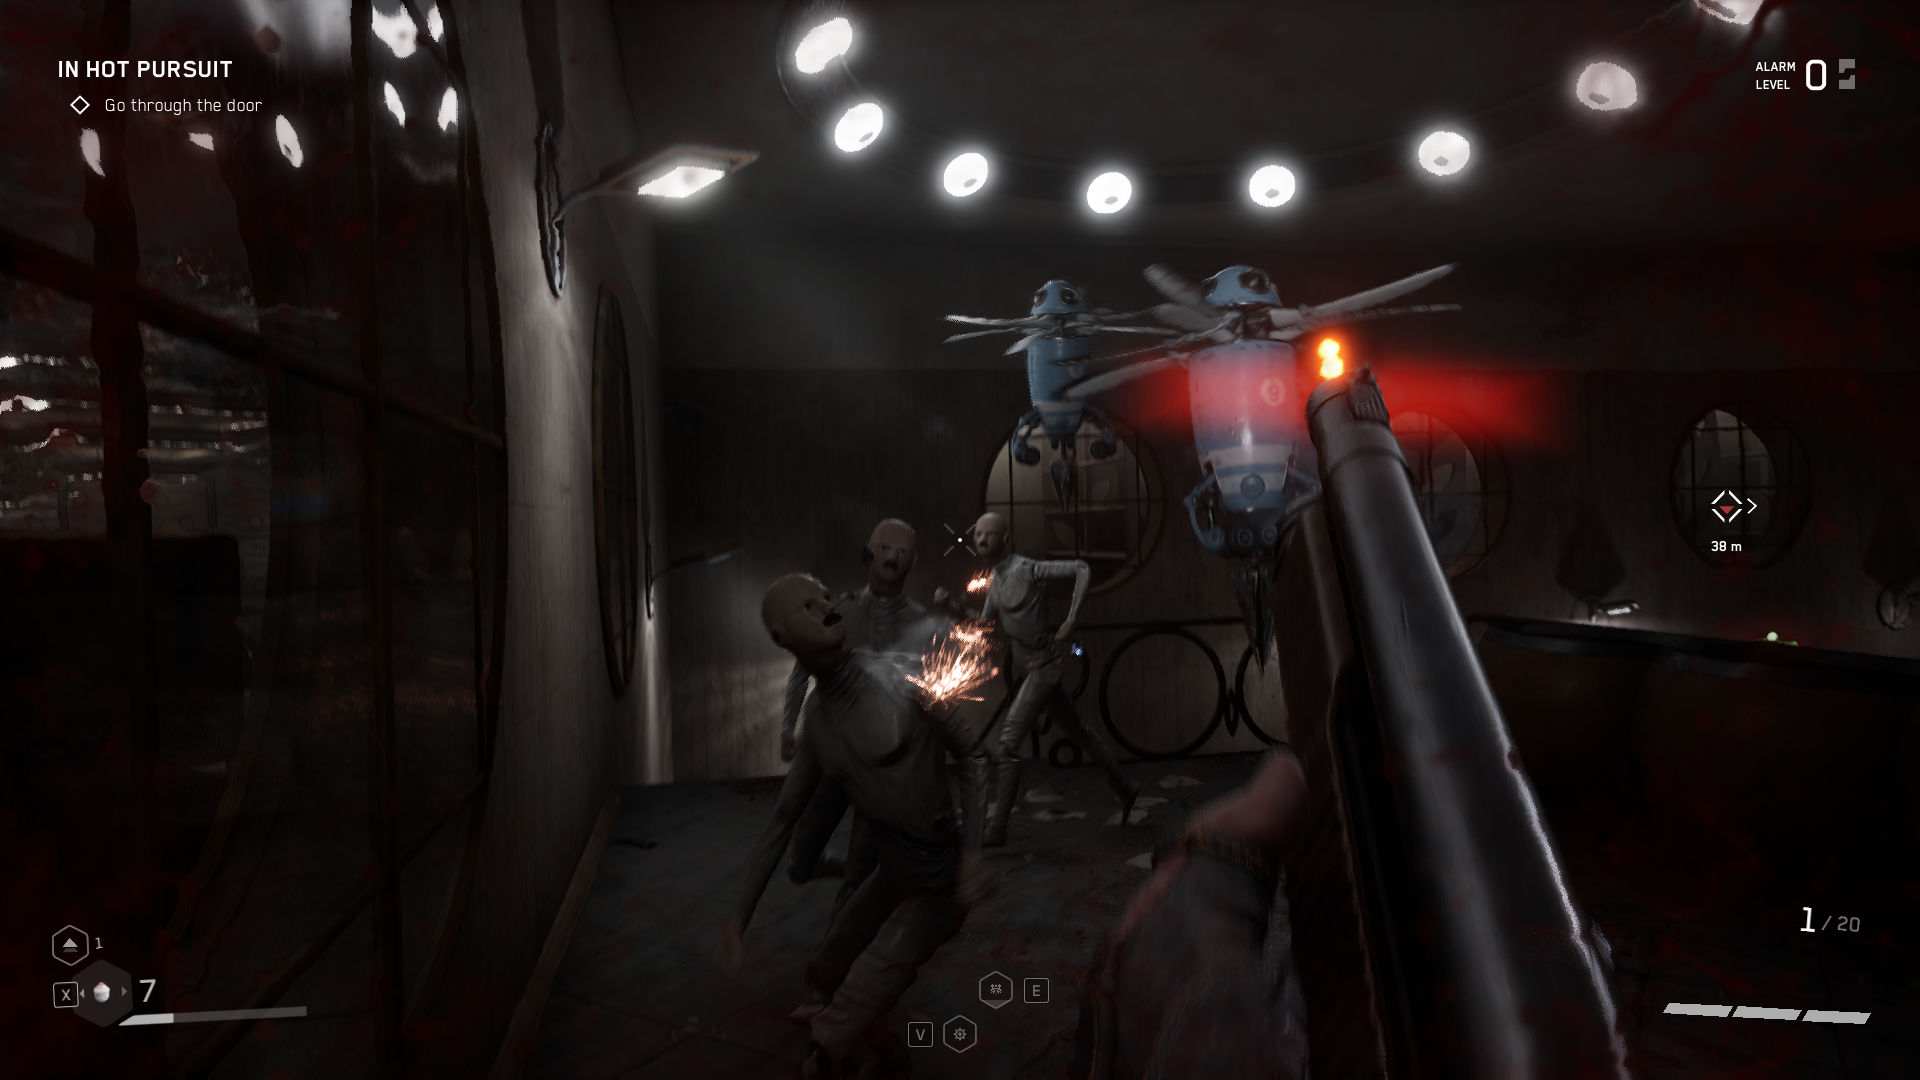 Atomic Heart review in progress: a thrilling fps with Bioshock vibes -  Polygon